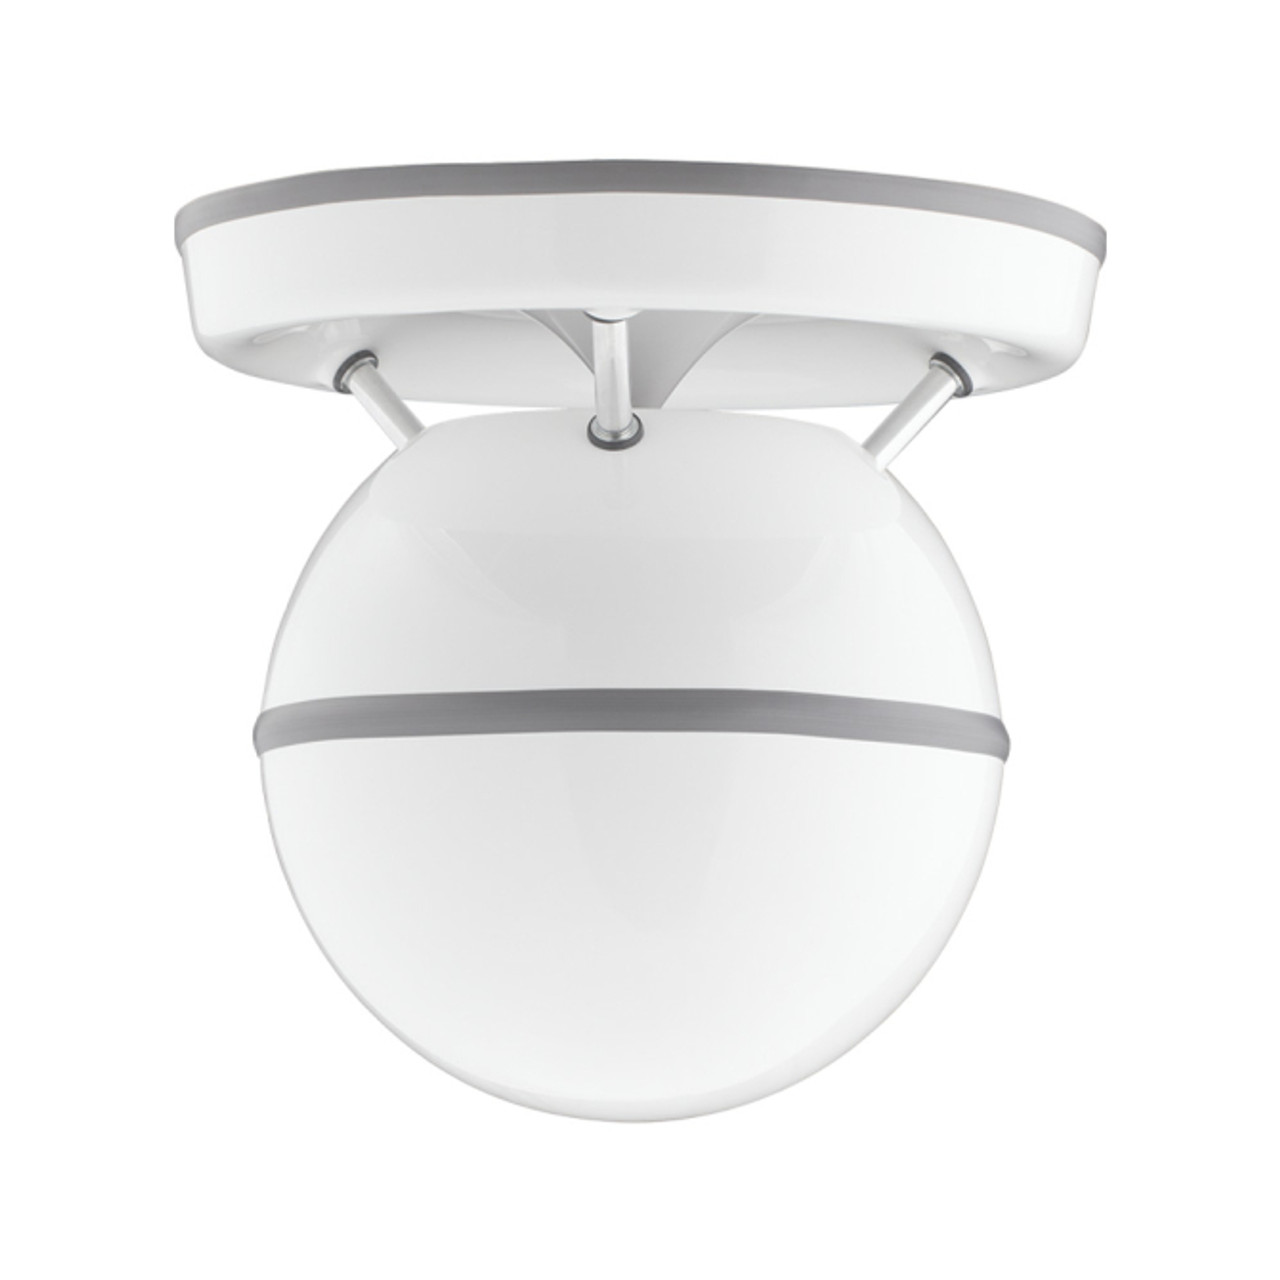 Soundsphere SS-Q-8-WH Loudspeaker in White (SS-Q-8-WH)